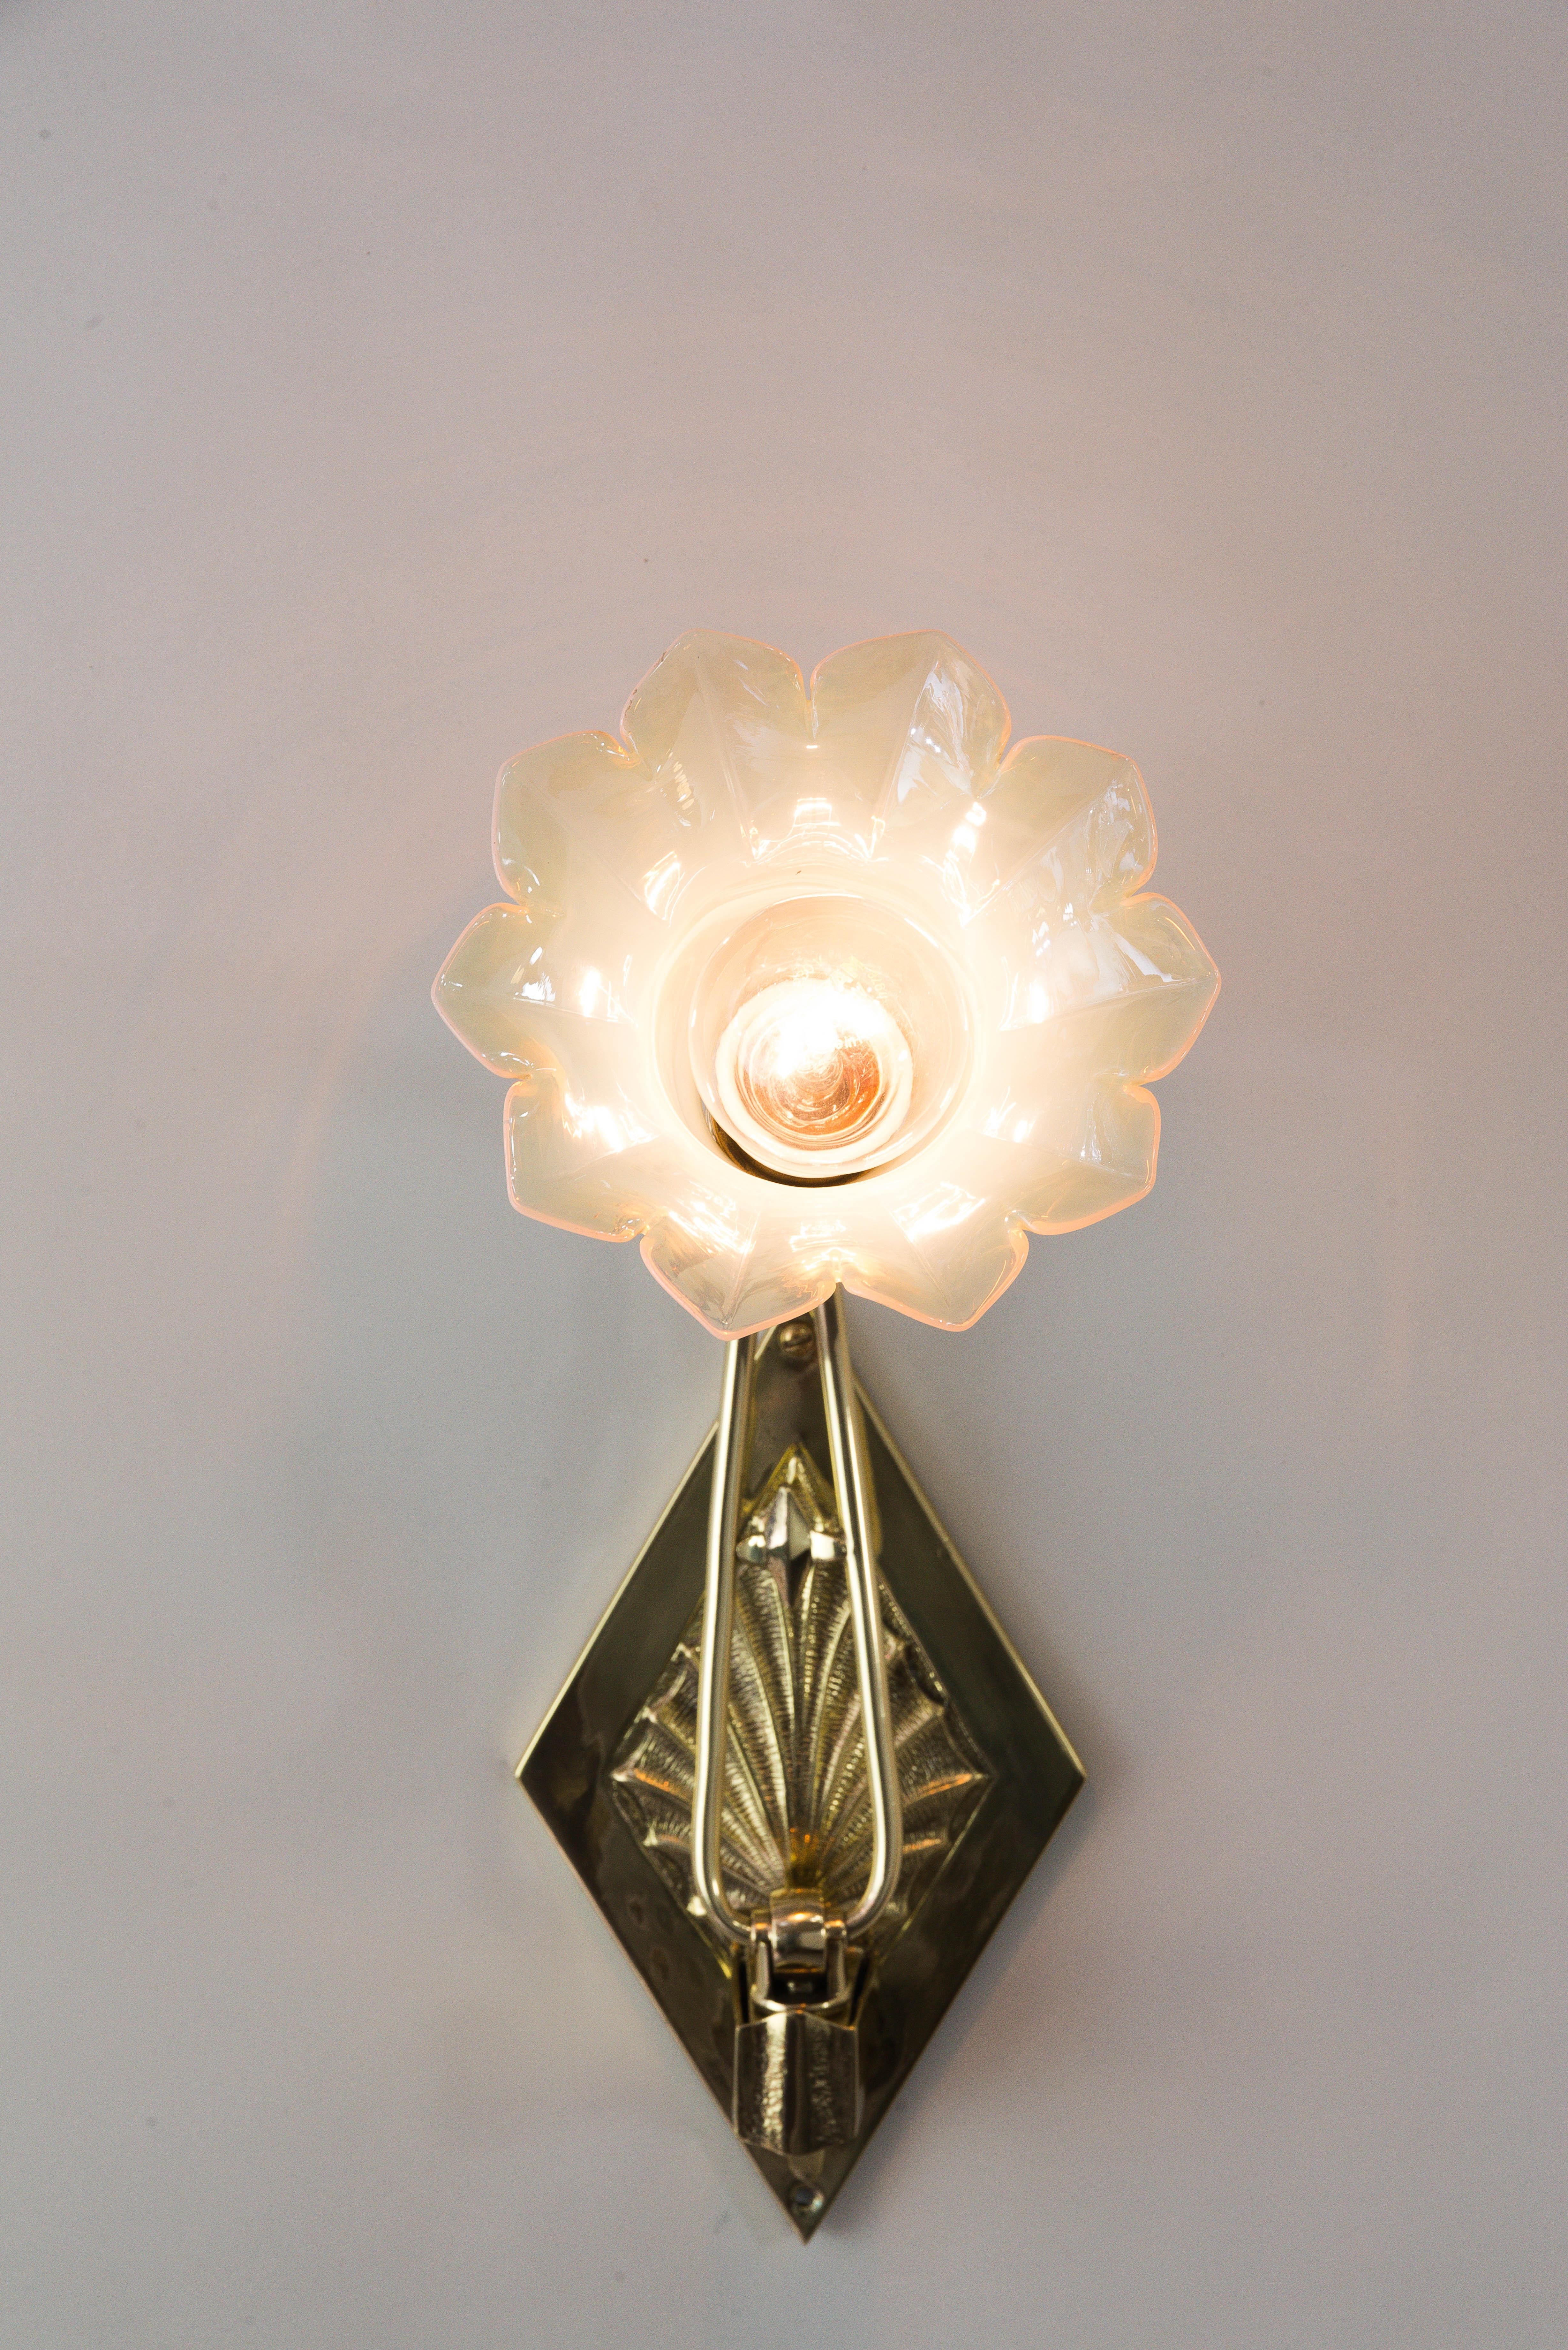 Adjustable Art Deco Wall Lamp circa 1920s with Opaline Glass Shade 11